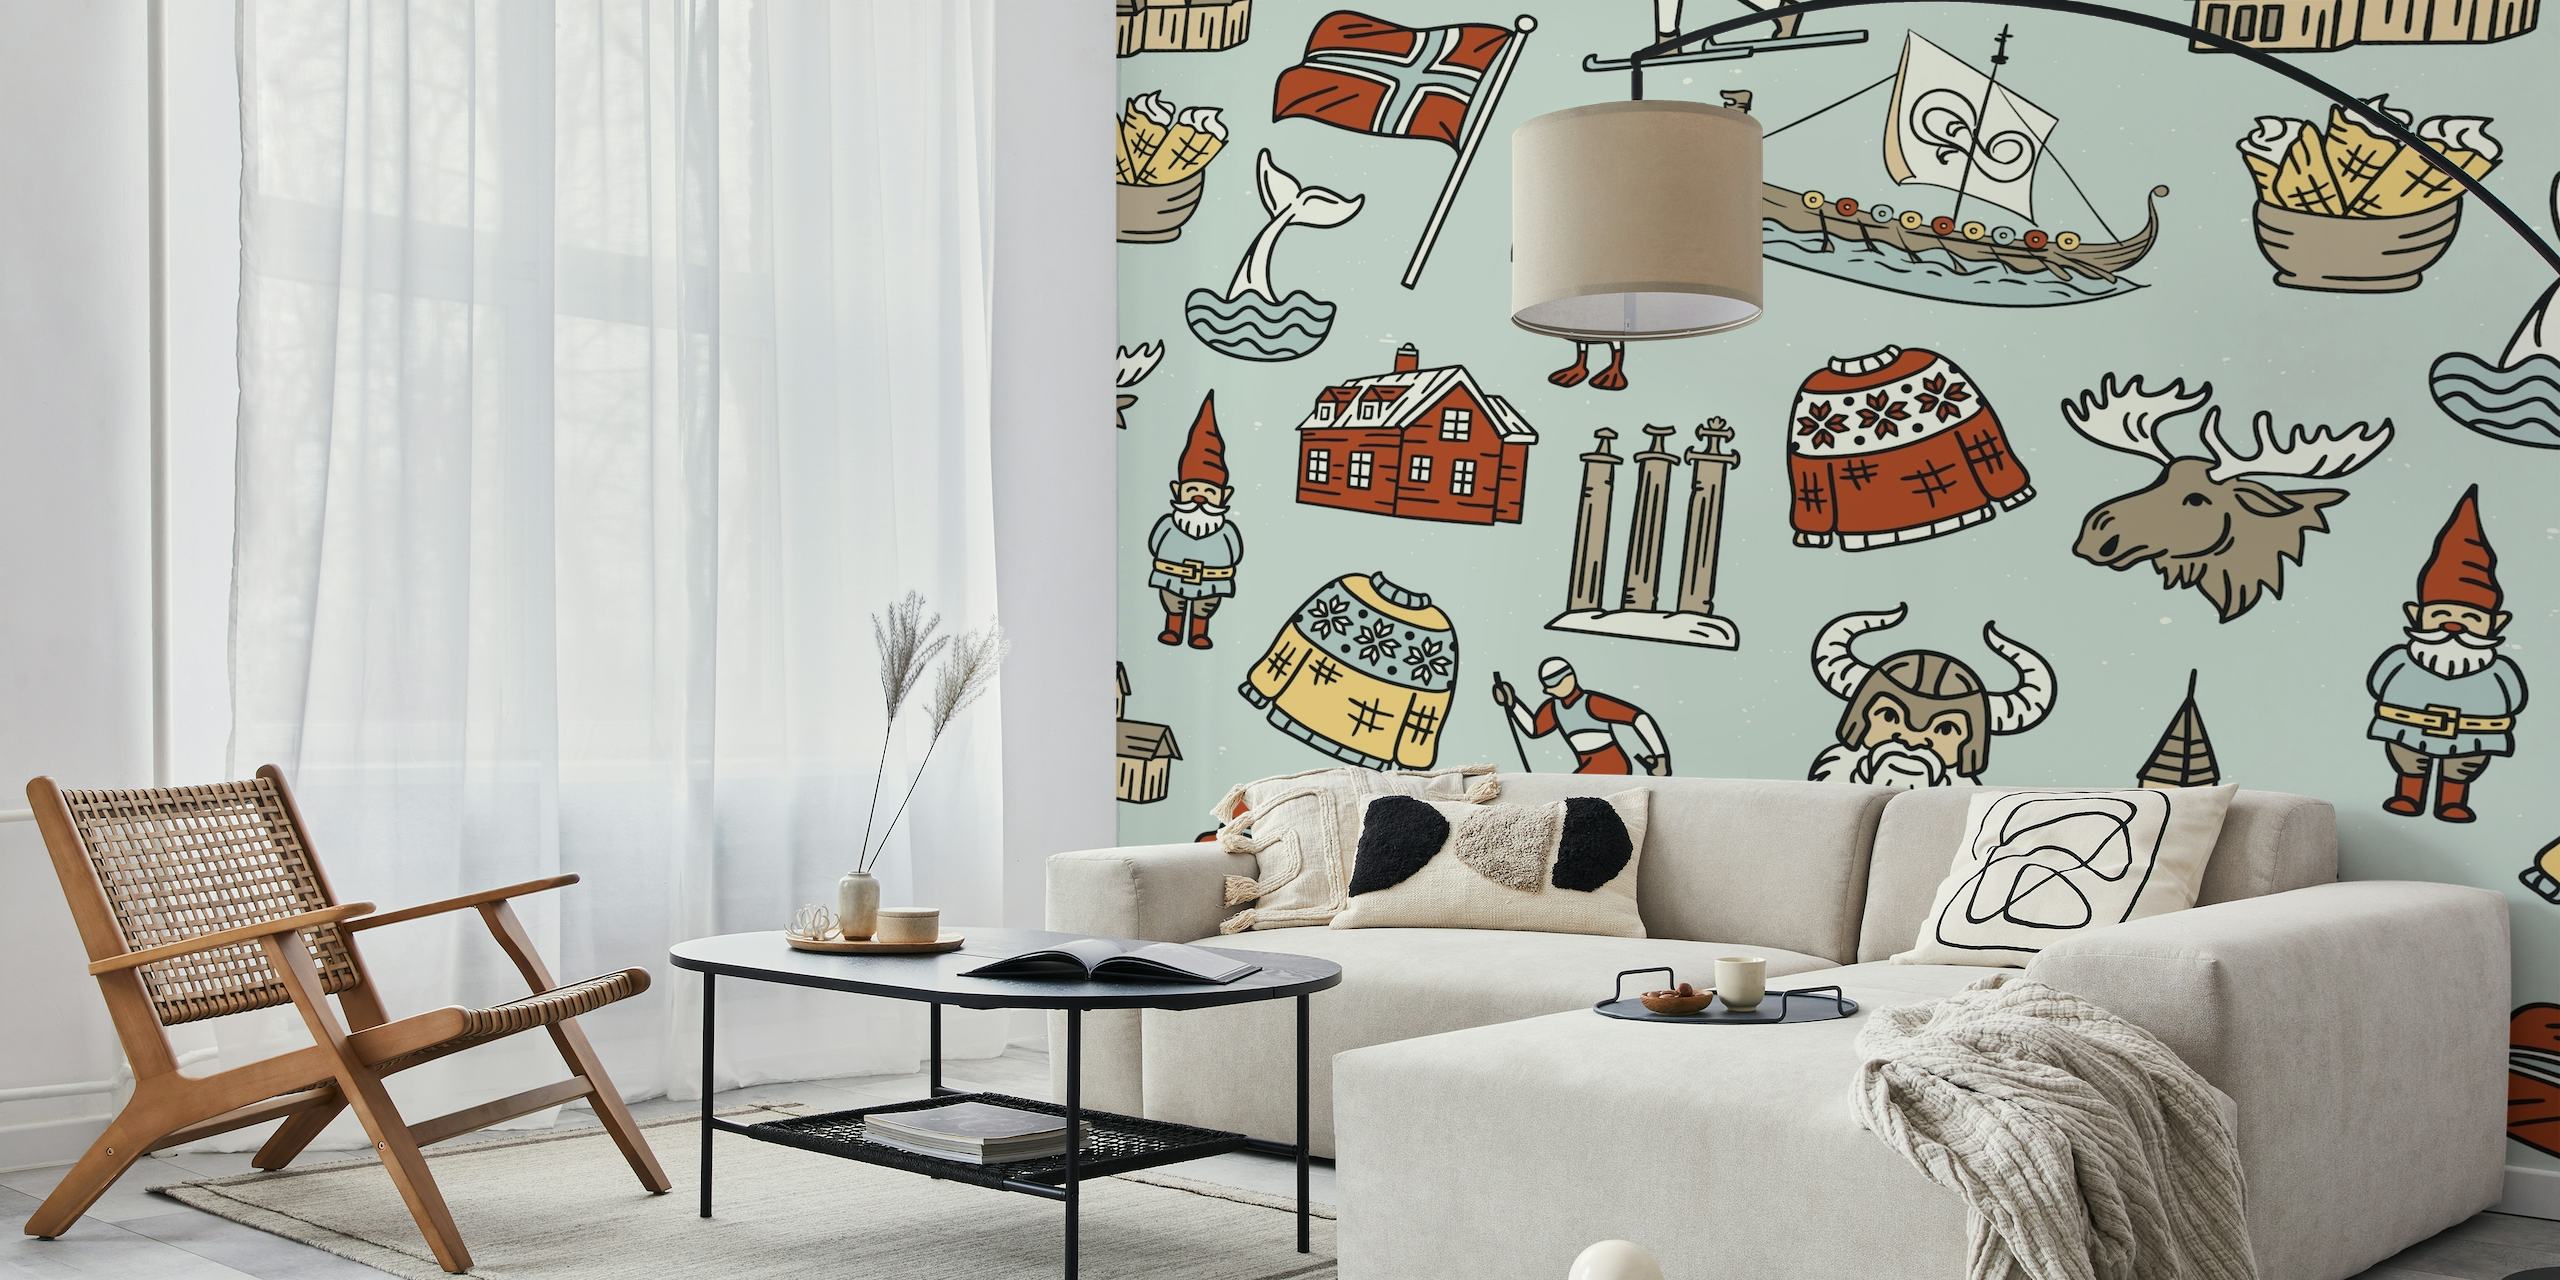 Norwegian themed wall mural with Viking ships, puffins, and traditional houses in a retro pattern.